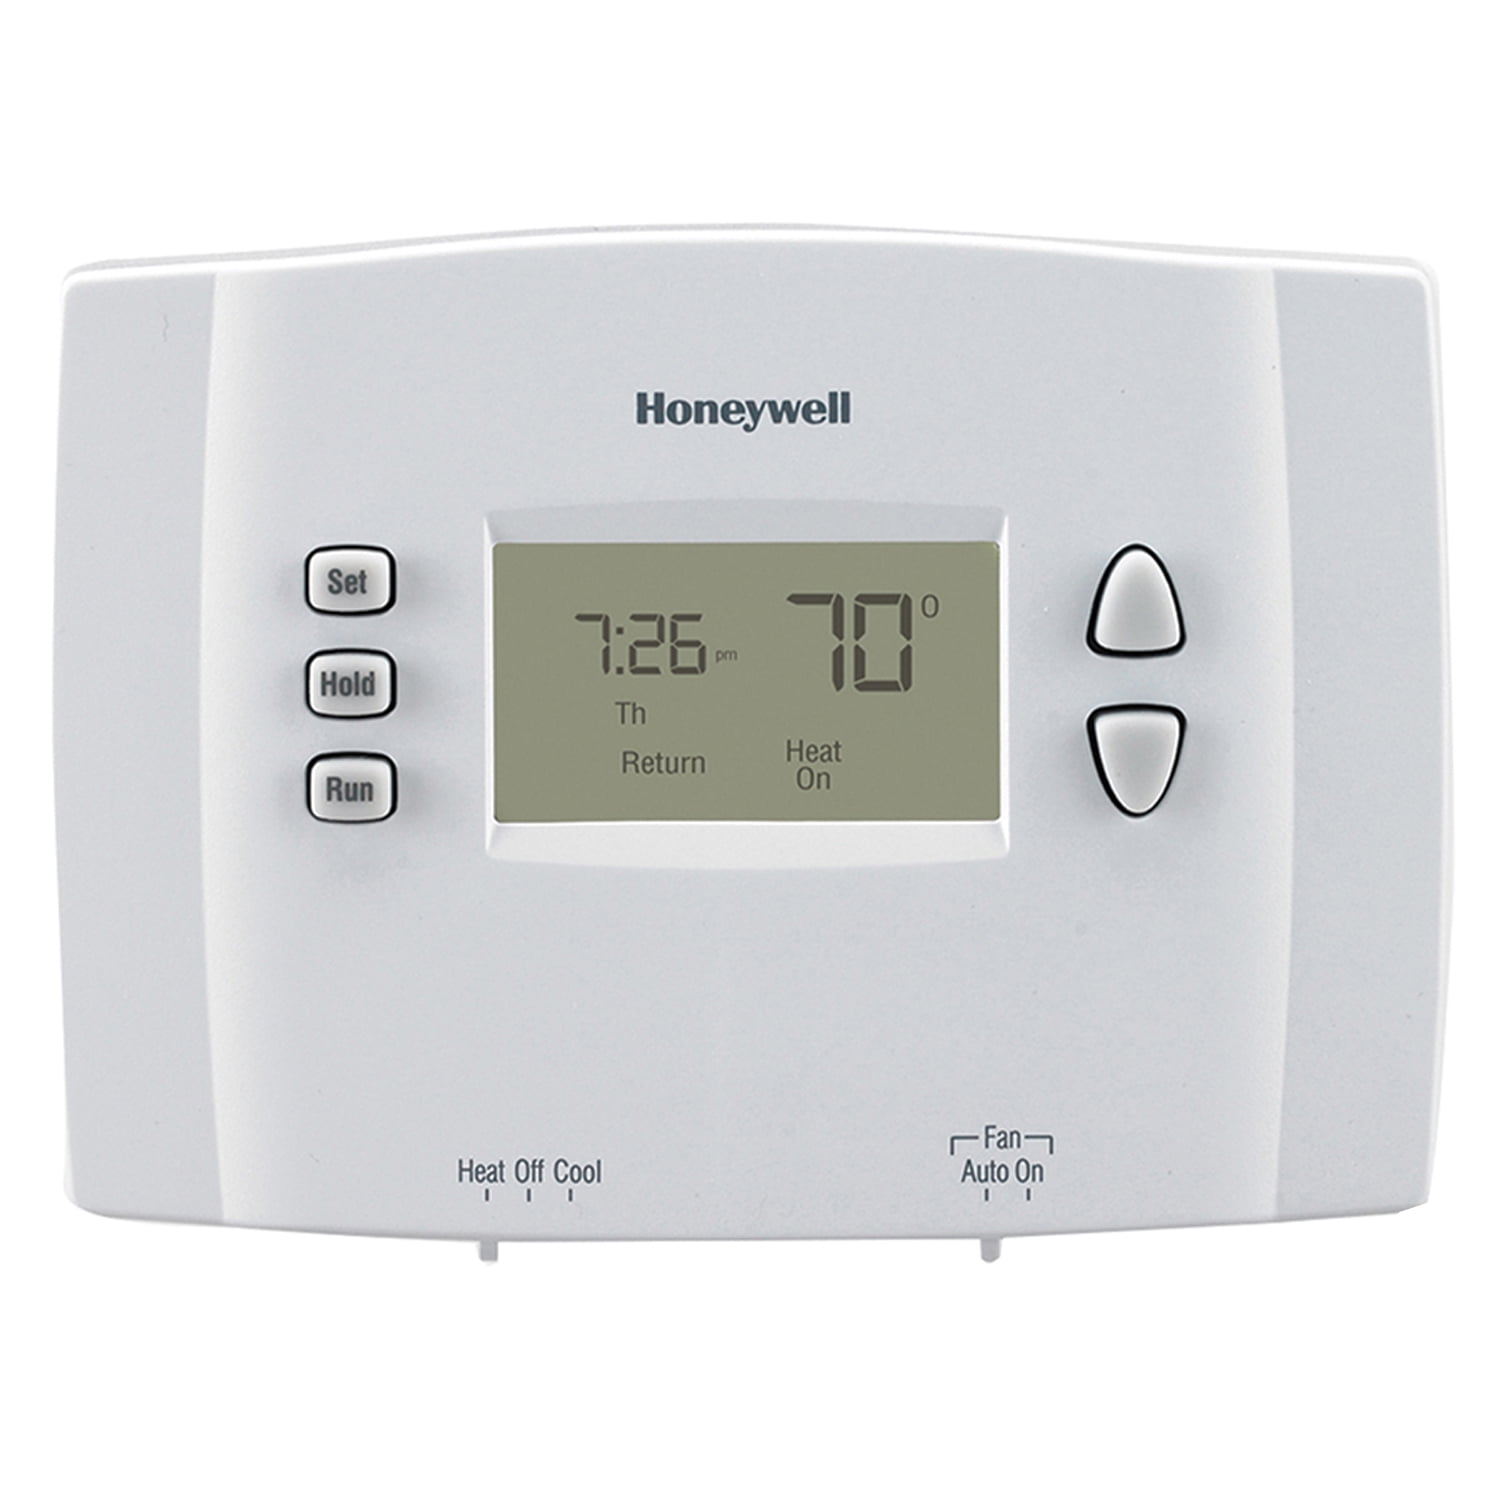 Honeywell Heater Thermostat How To Use